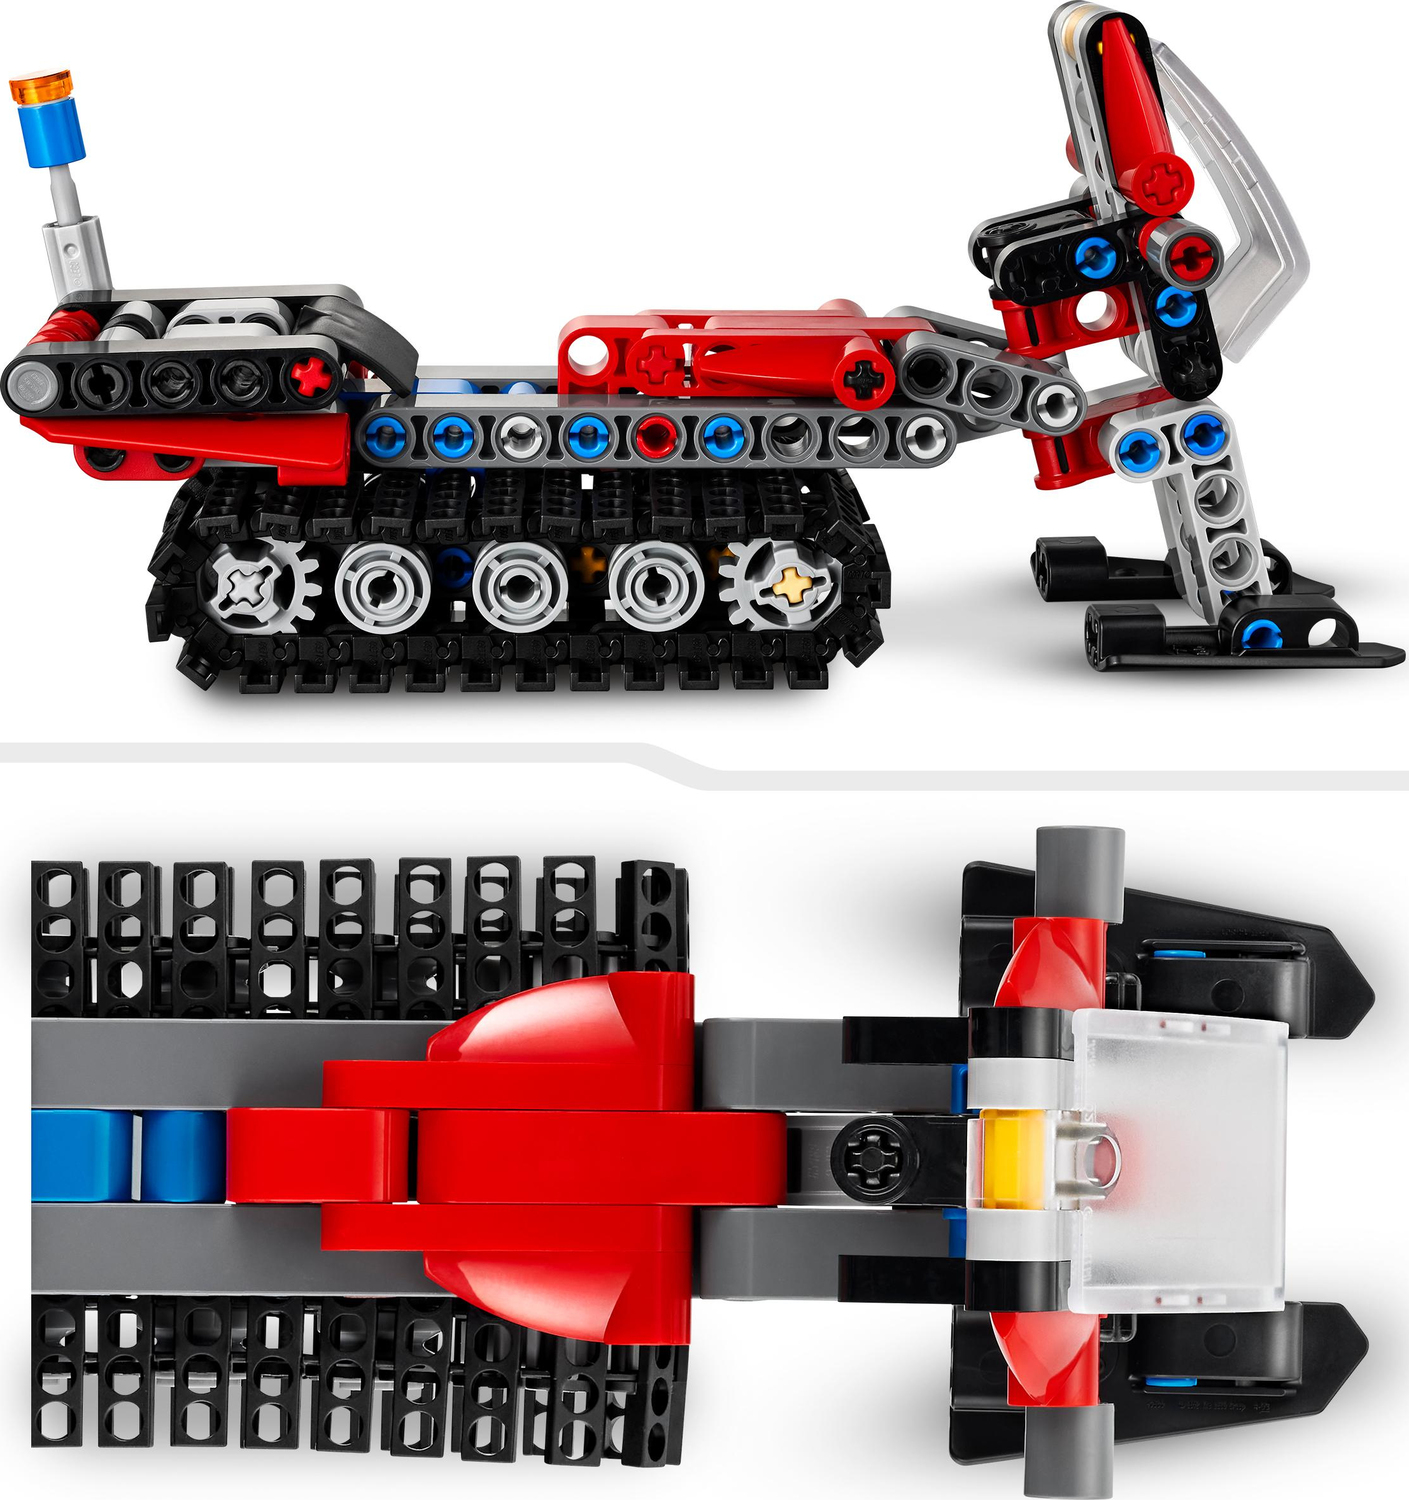 Technic: Groomer 2in1 Building Set - Imagine That Toys